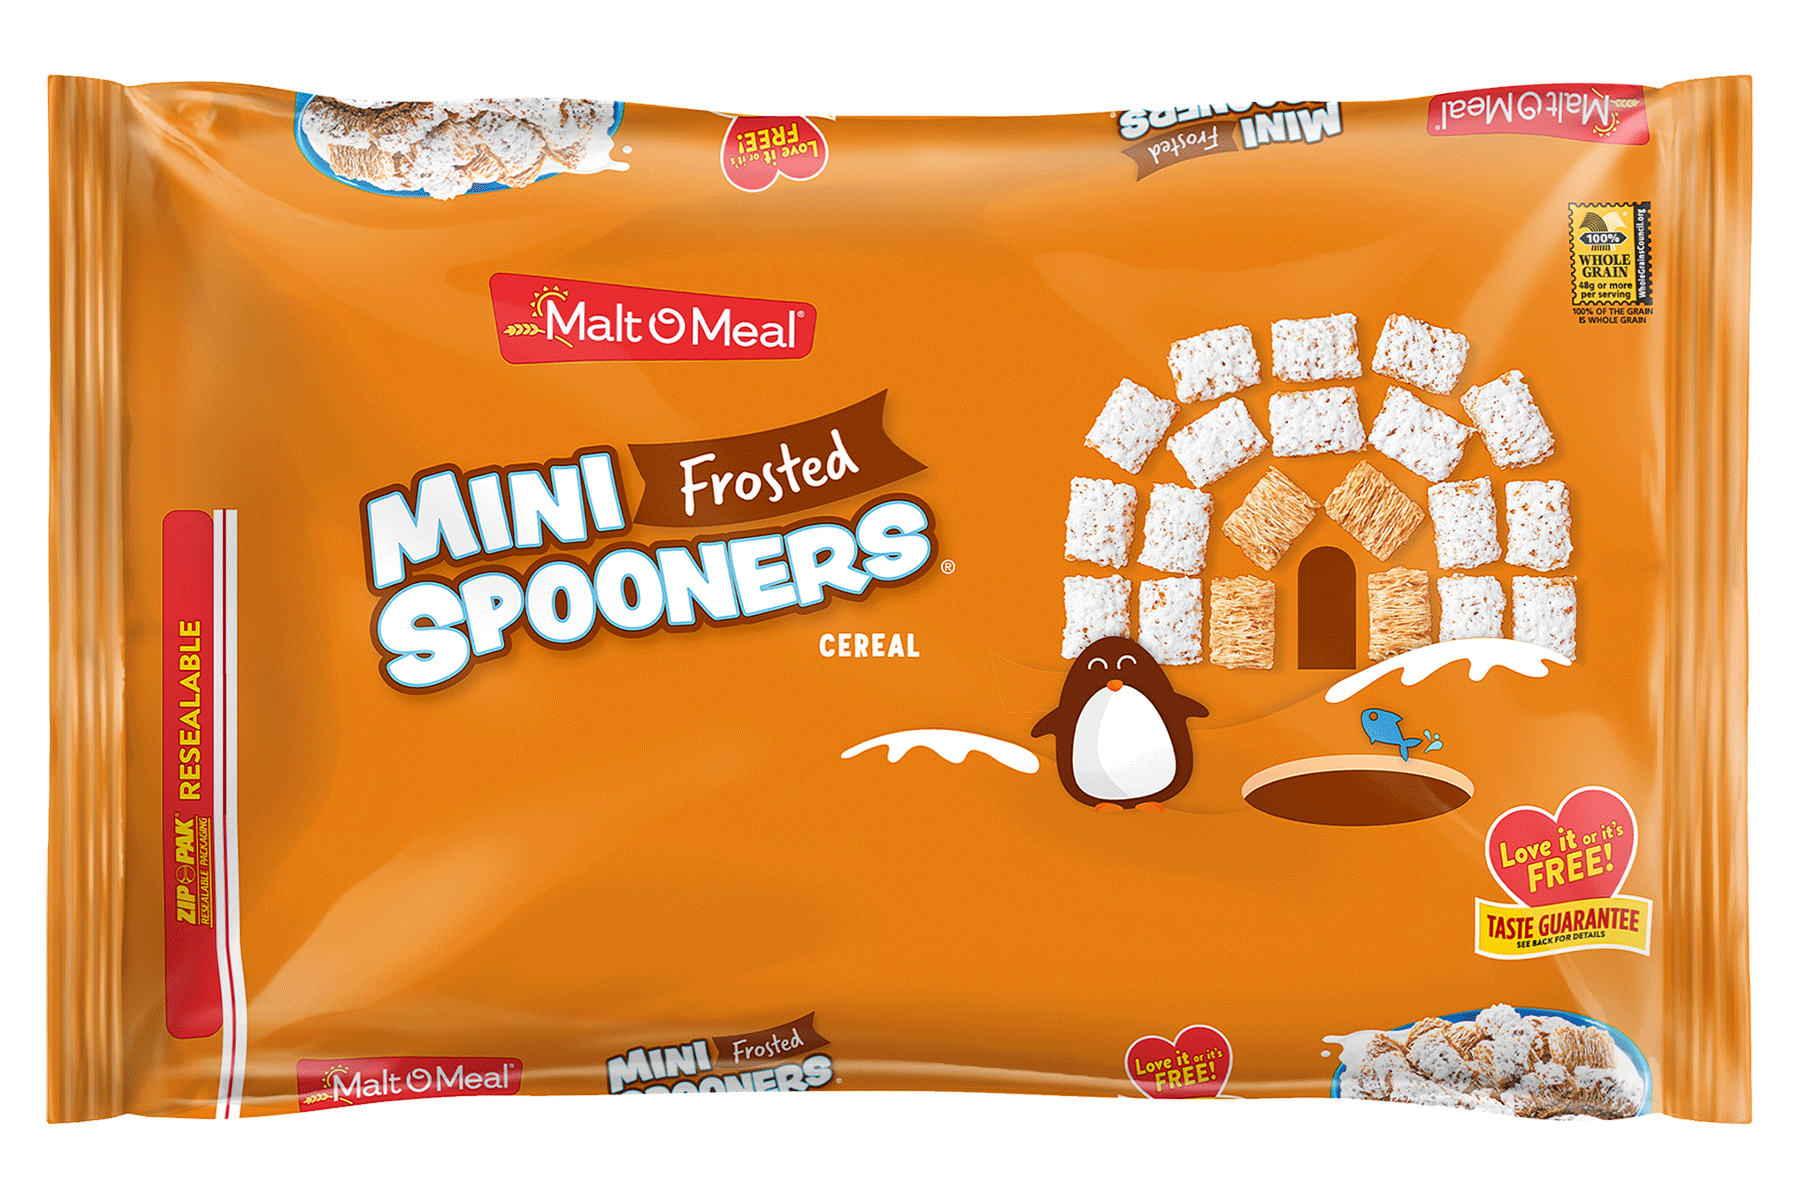 New Malt-O-Meal Frosted Mini Spooners Cereal Bag